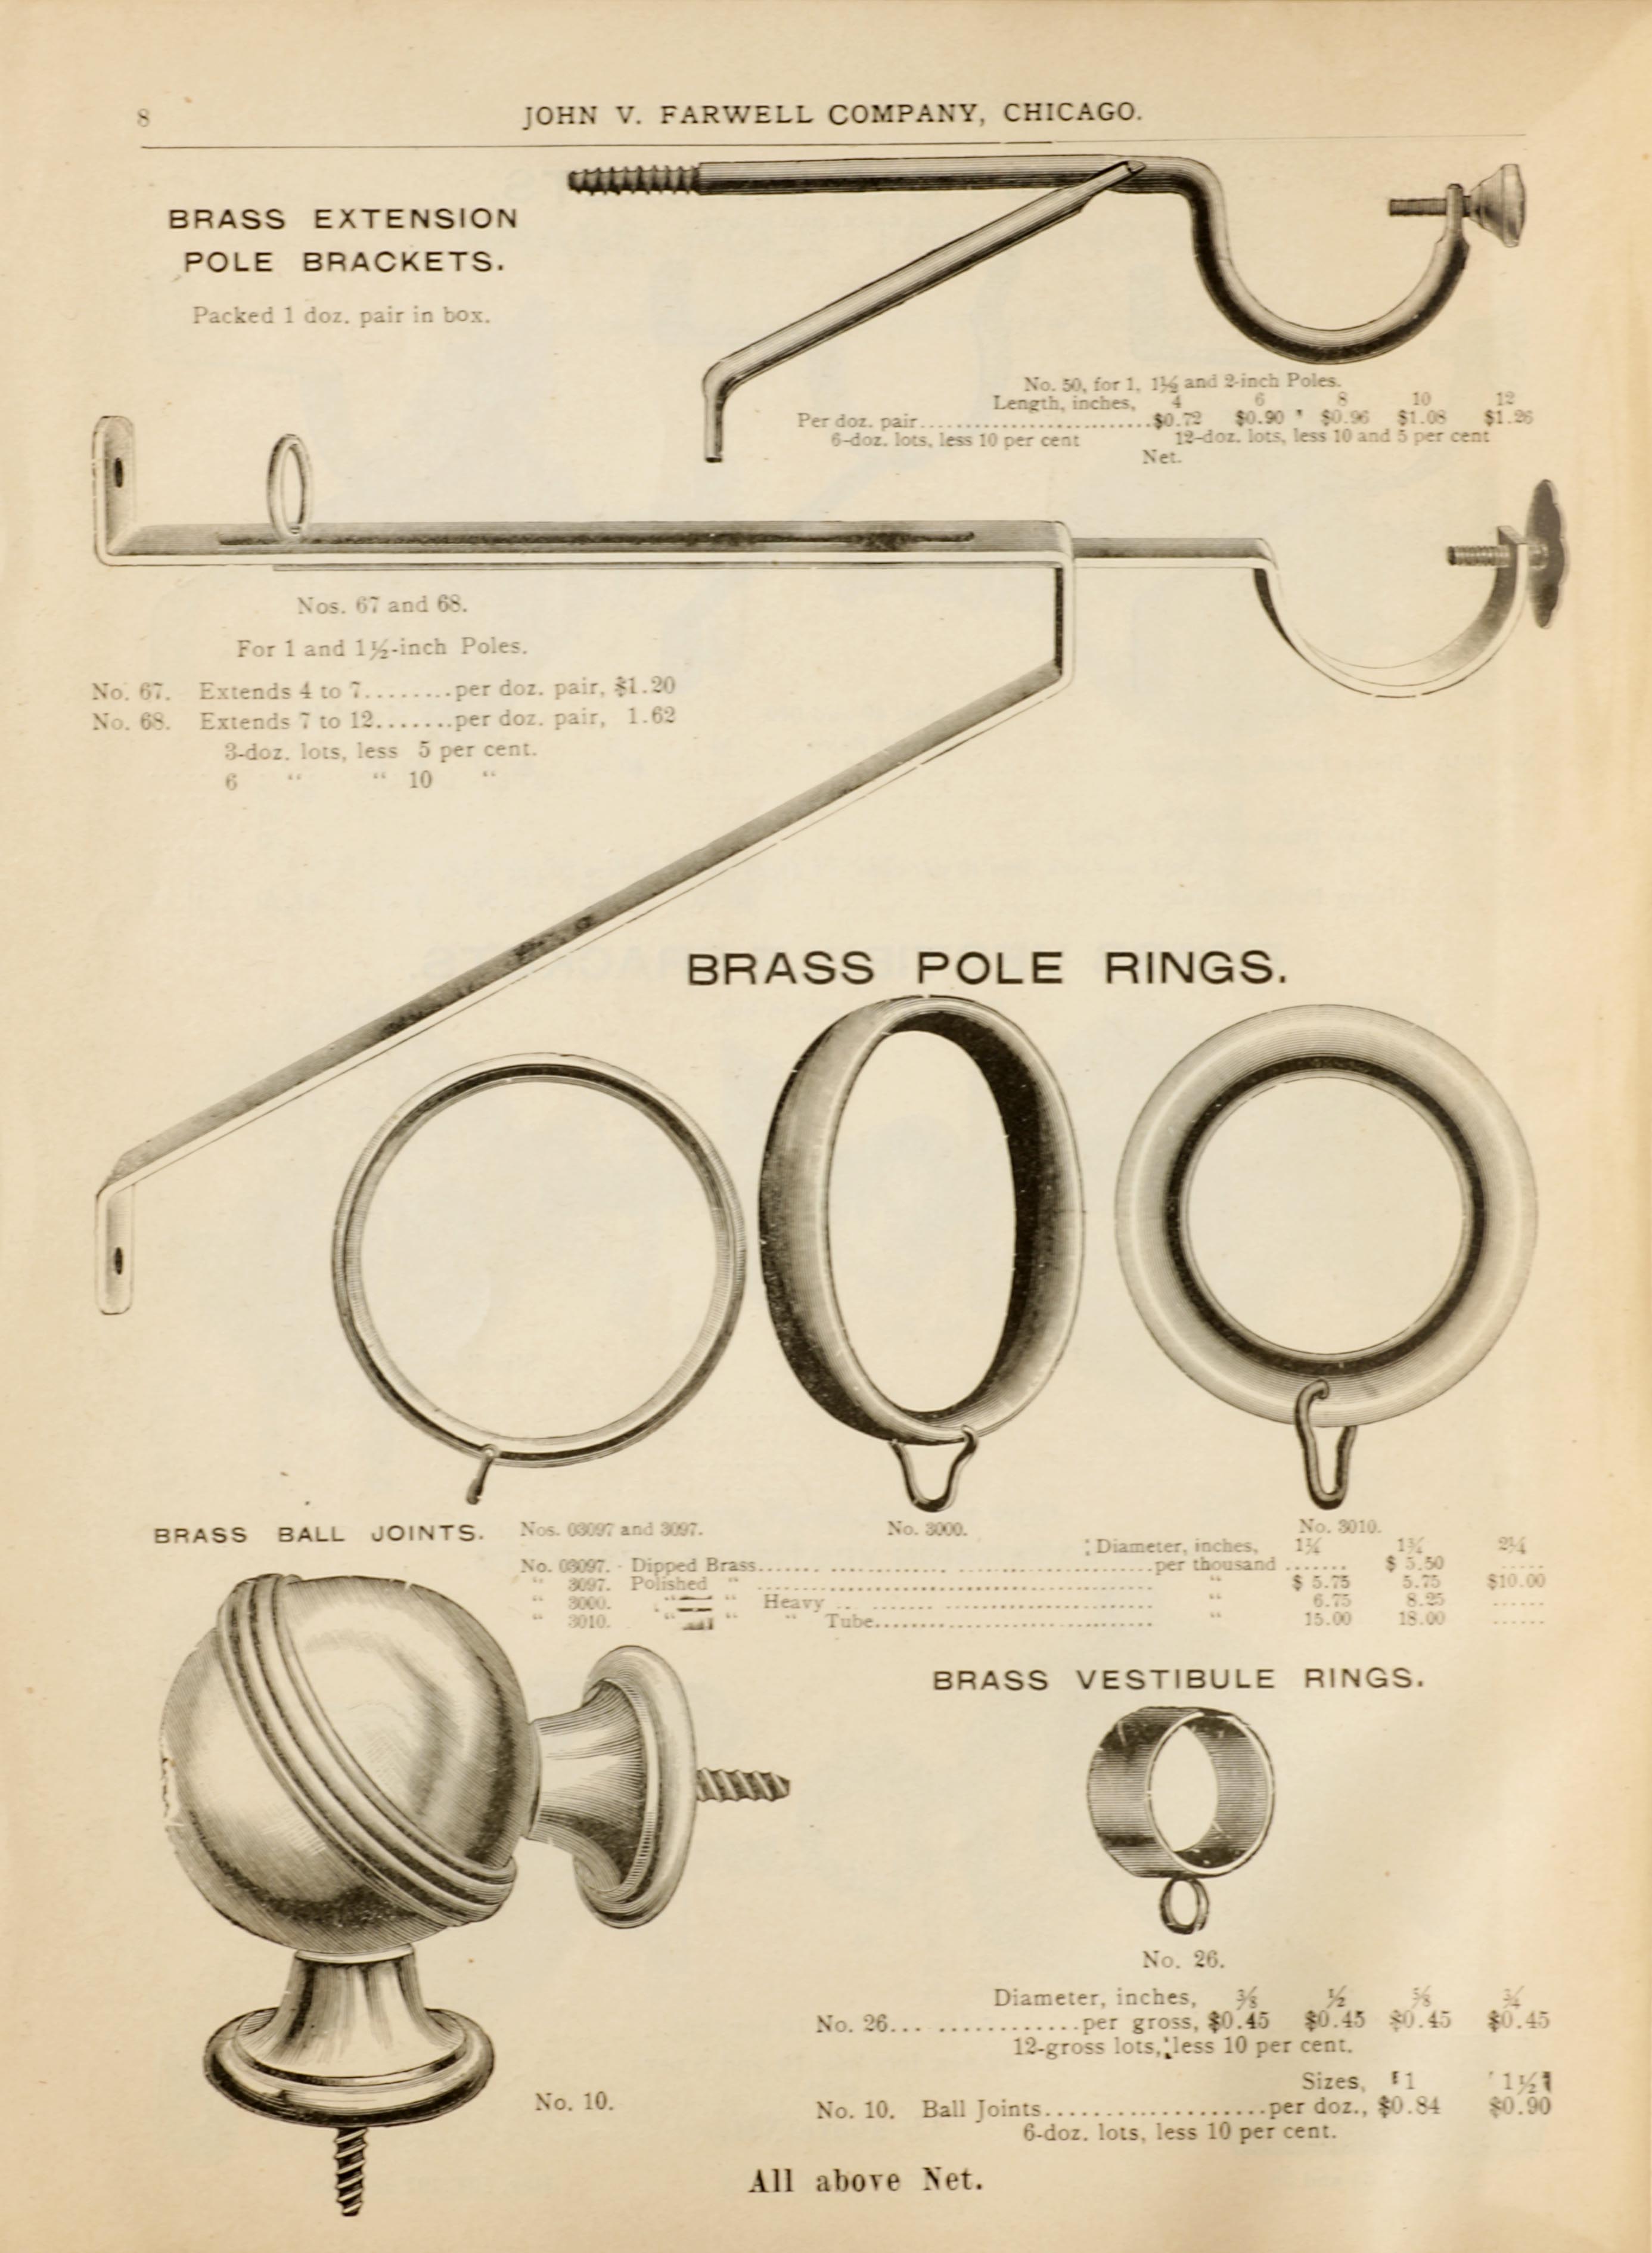 John V. Farwell Iron Bed Catalog, Chicago 1895- Page 9